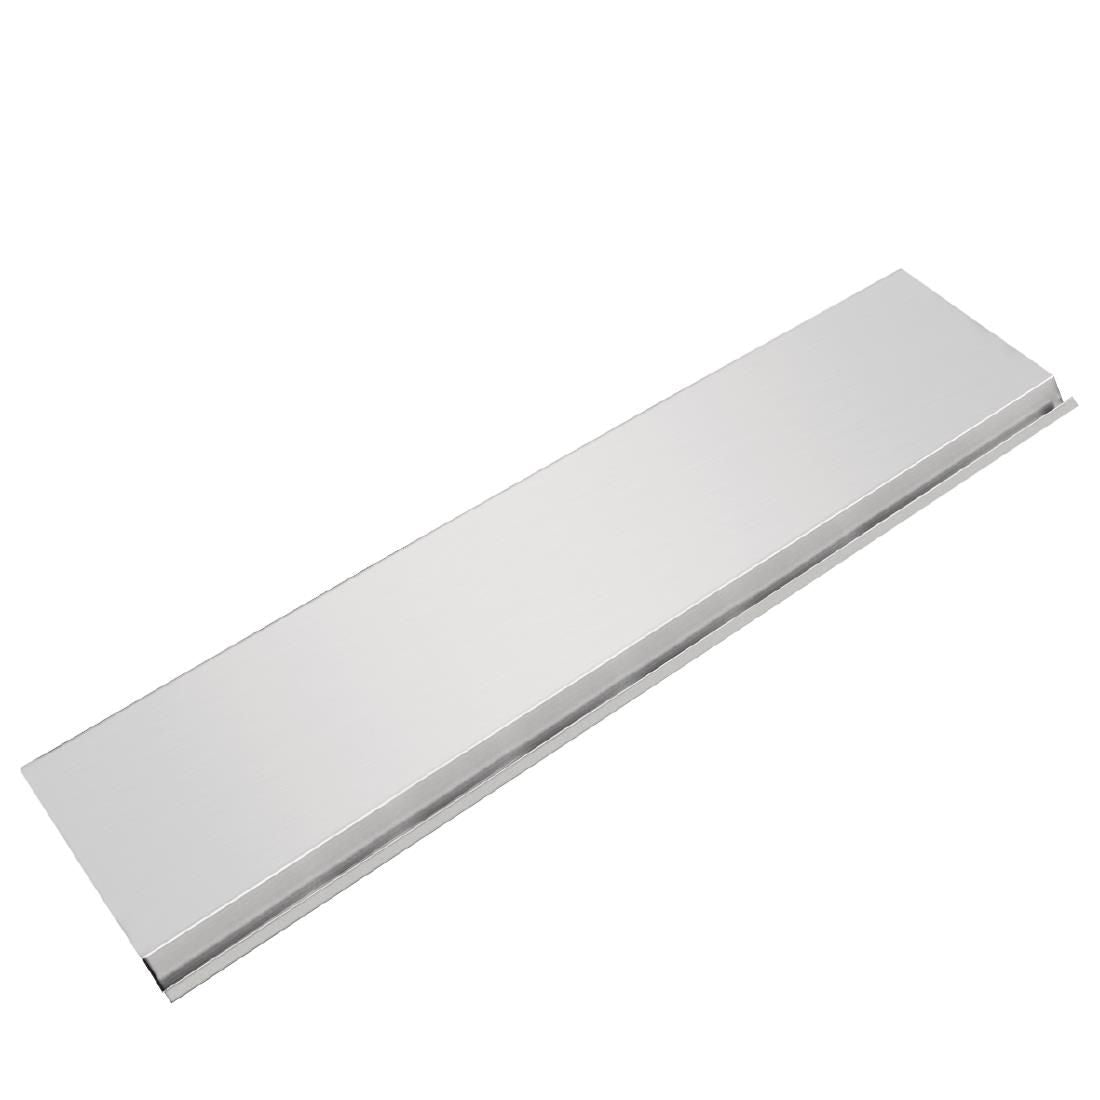 AA063 Replacement Top Cover for G605 Salad/Pizza Prep Refrigerated Counter